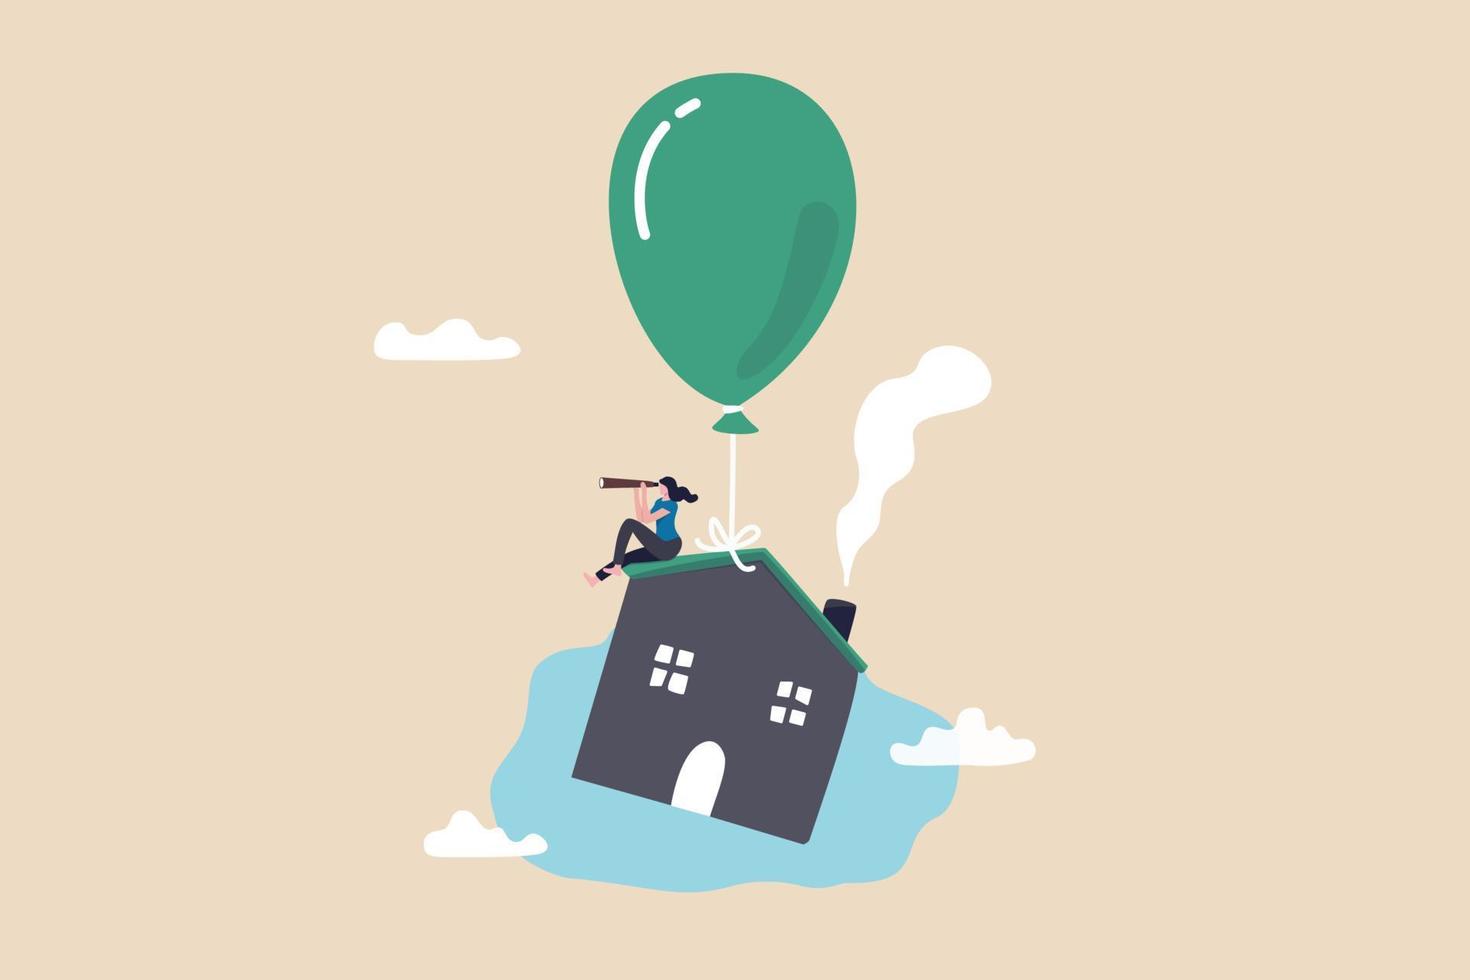 House mortgage interest rate rising up, home loan impact from inflation, real estate price bubble or housing investment opportunity concept, home owner with telescope on flying house with balloon. vector